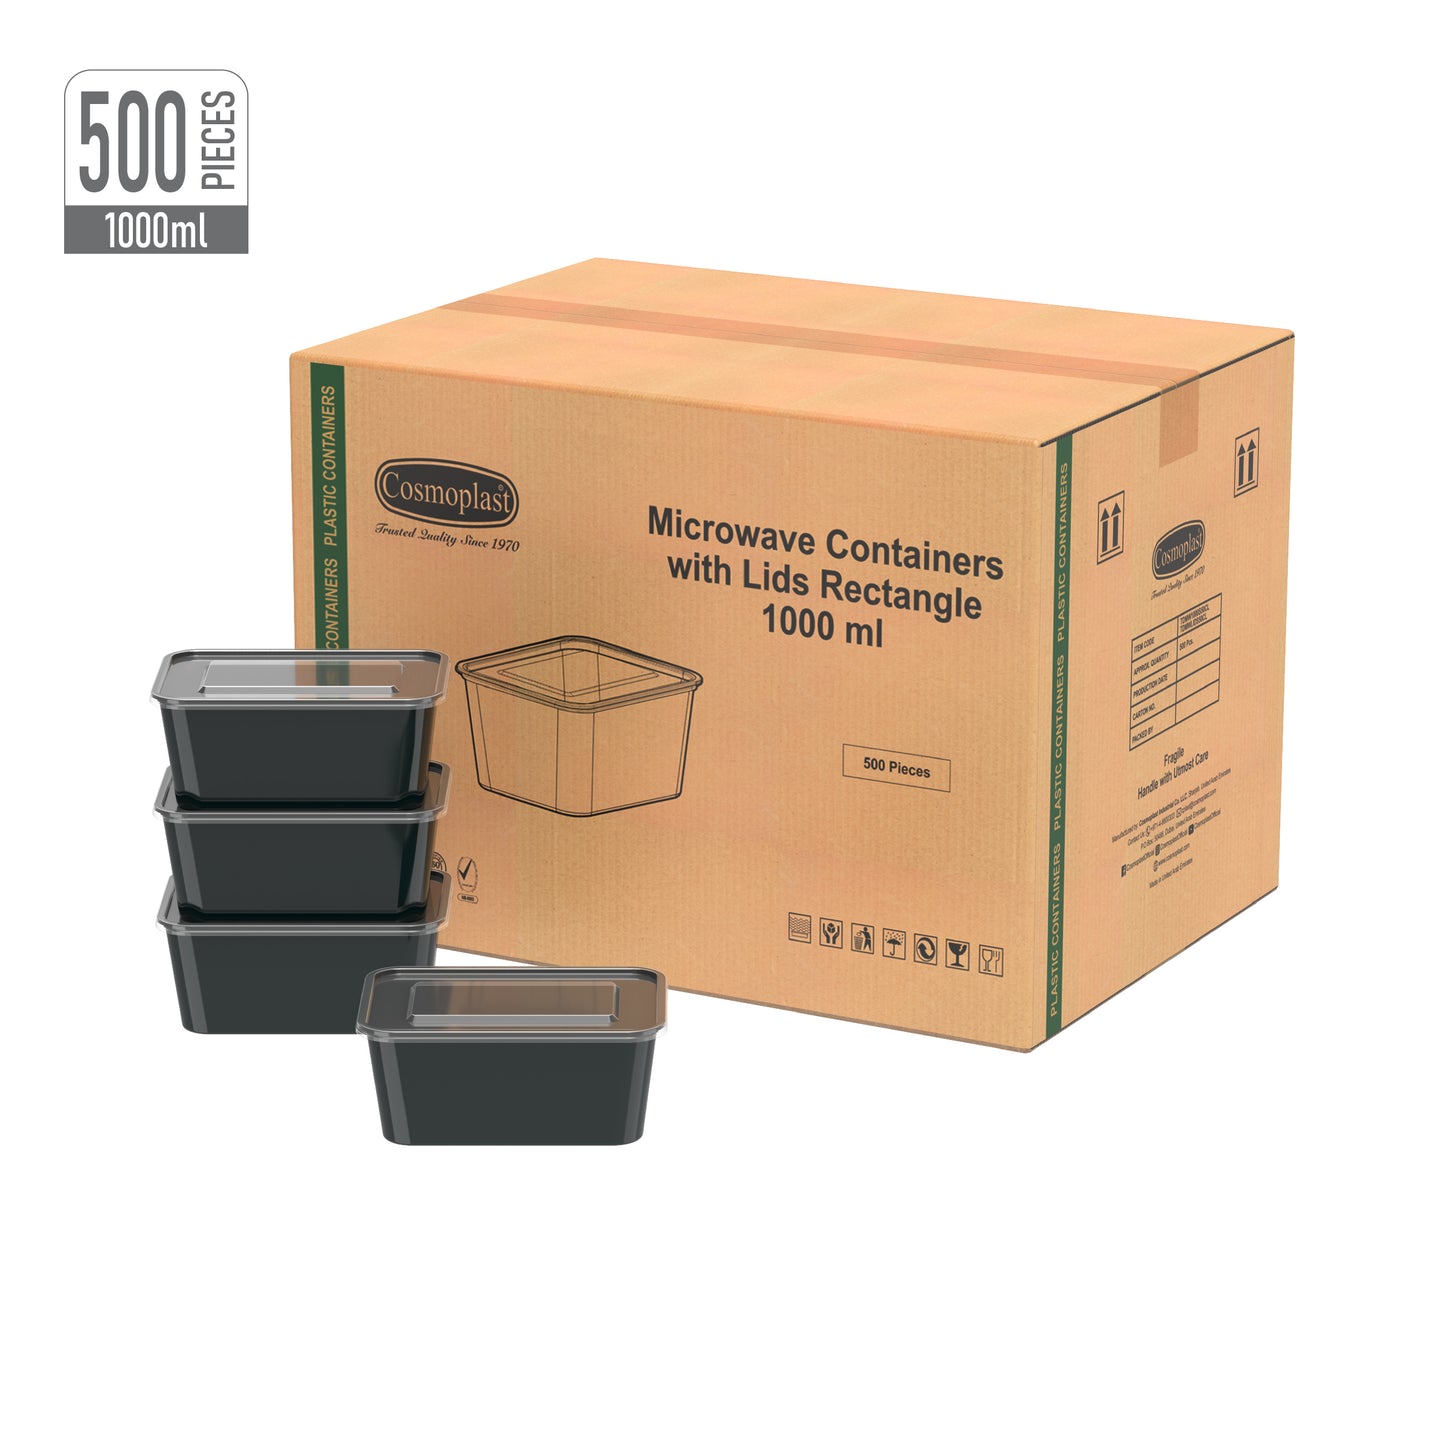 1000 ml Carton of 500 Black Microwave Containers with Clear Lids